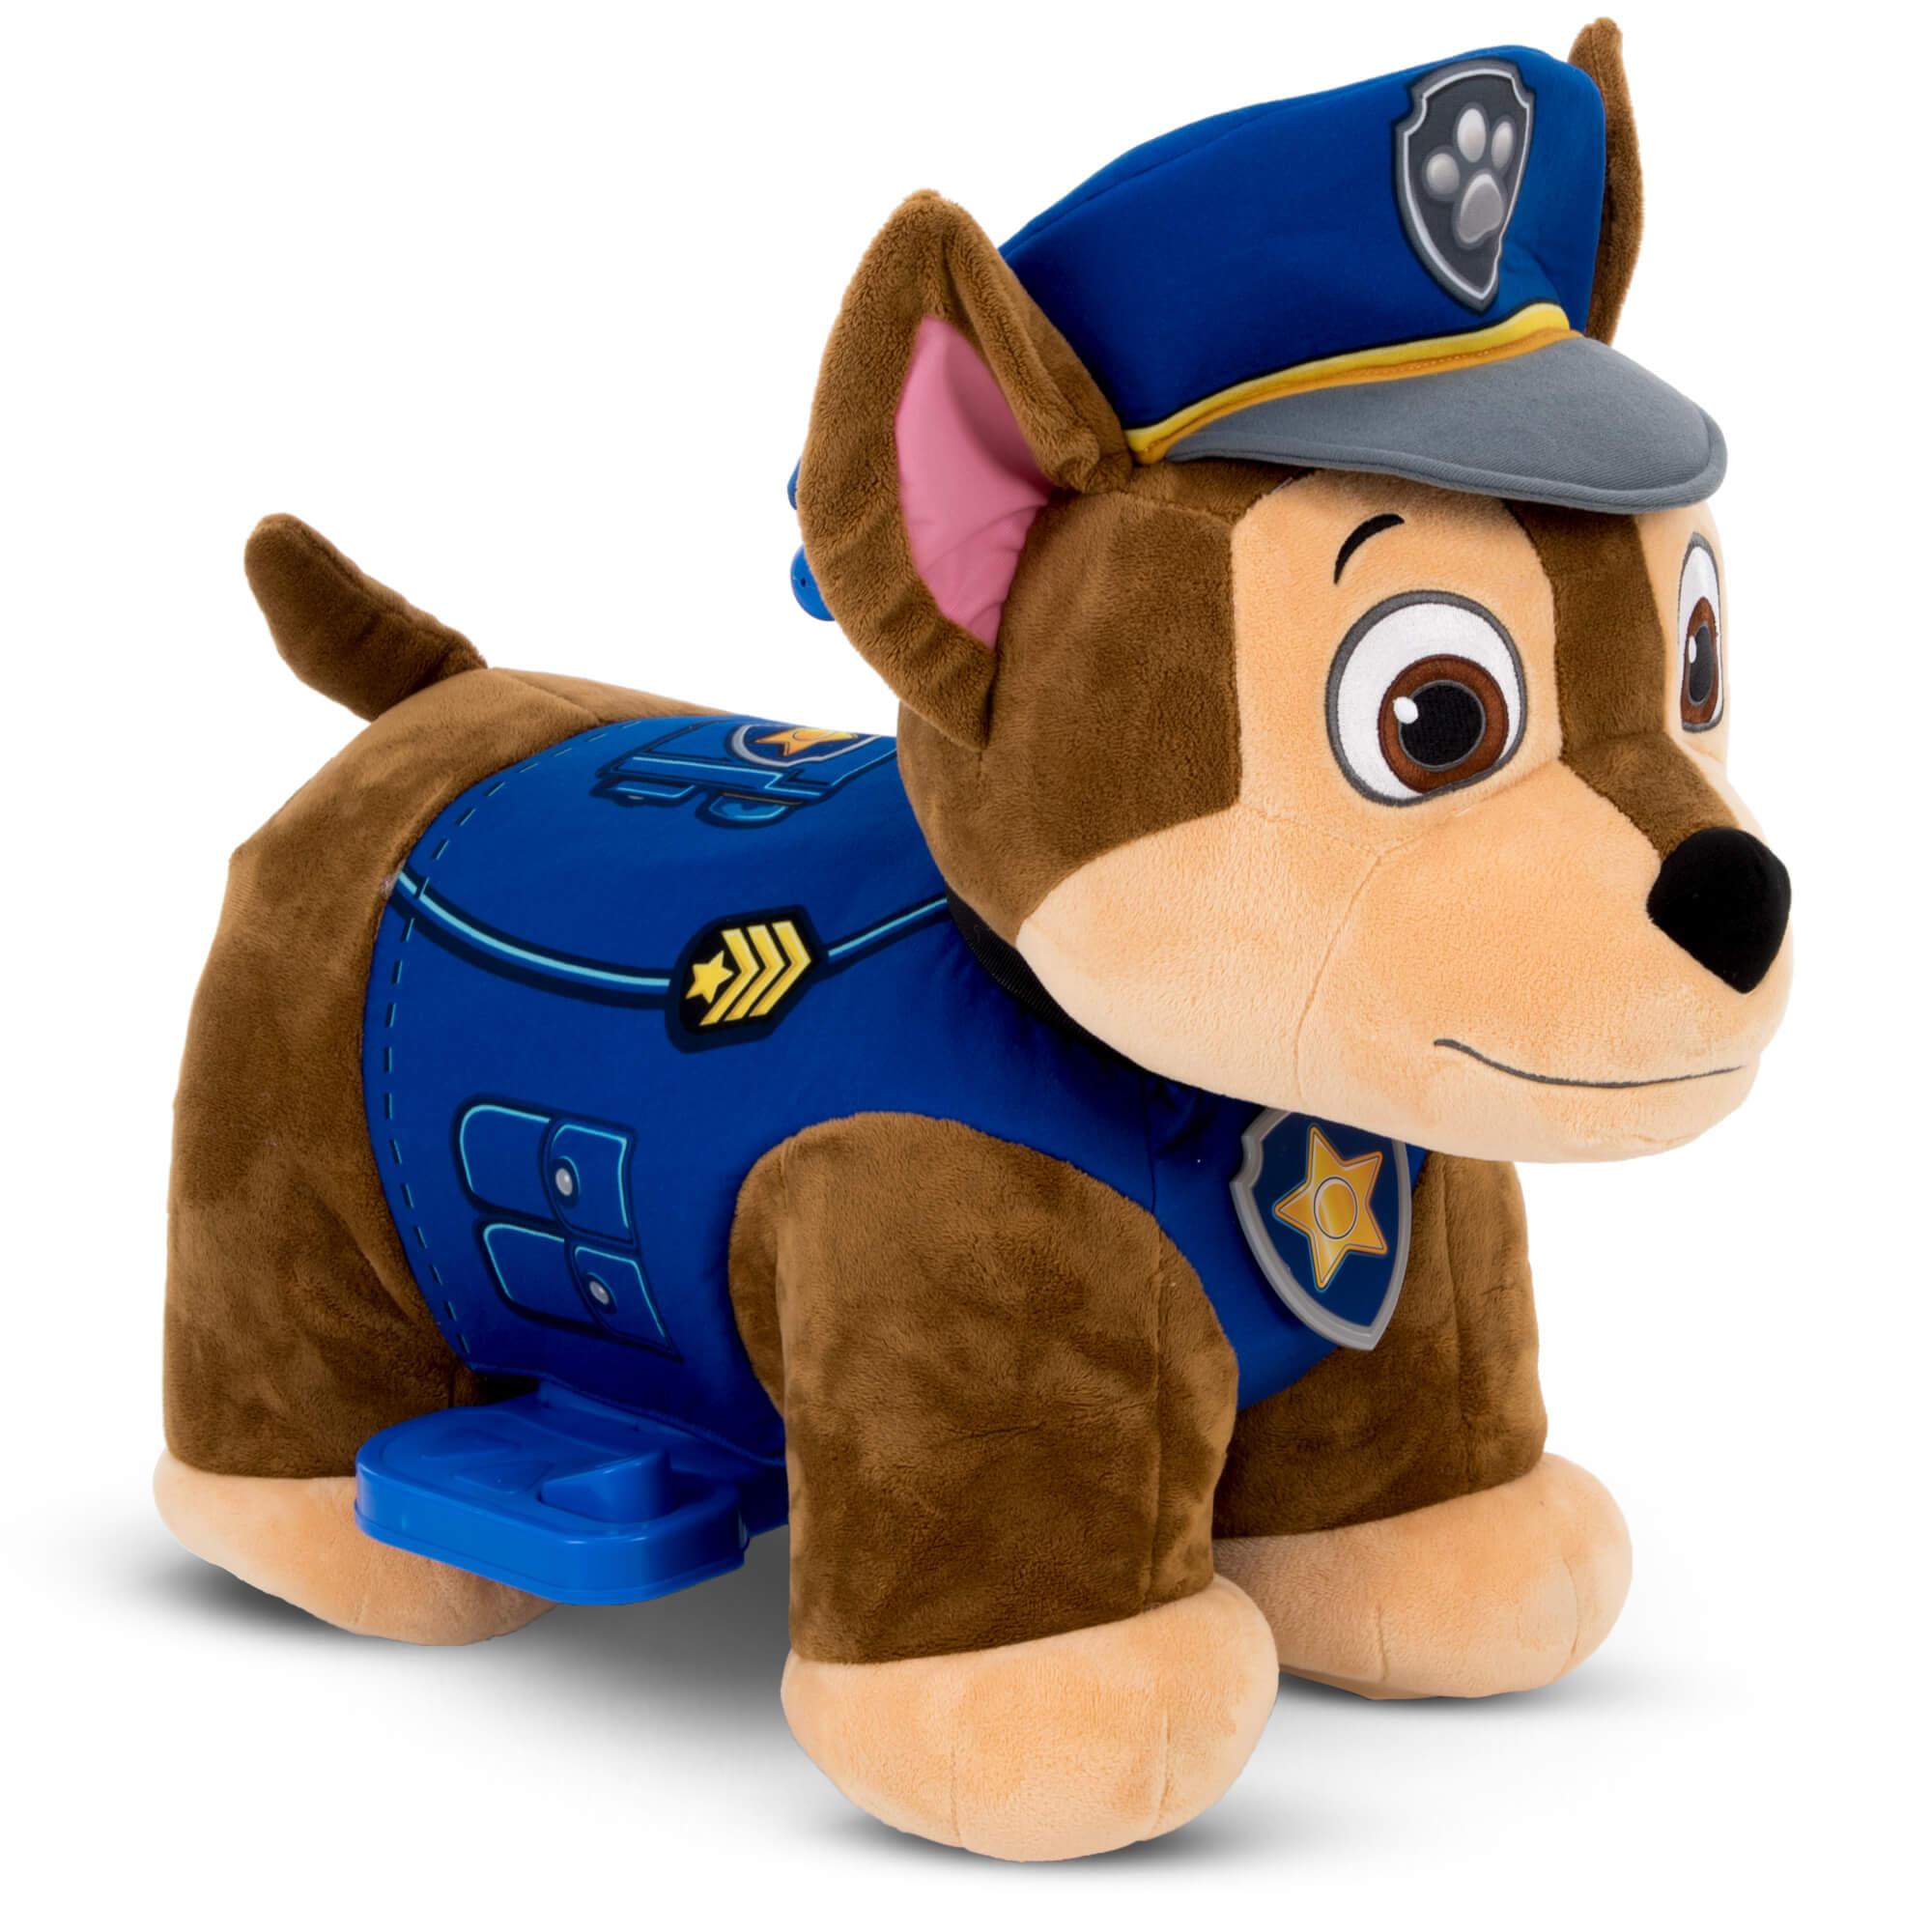 Nick Jr. PAW Patrol Chase 6V Plush Electric Ride-On Toy for Toddlers by Huffy - image 5 of 5